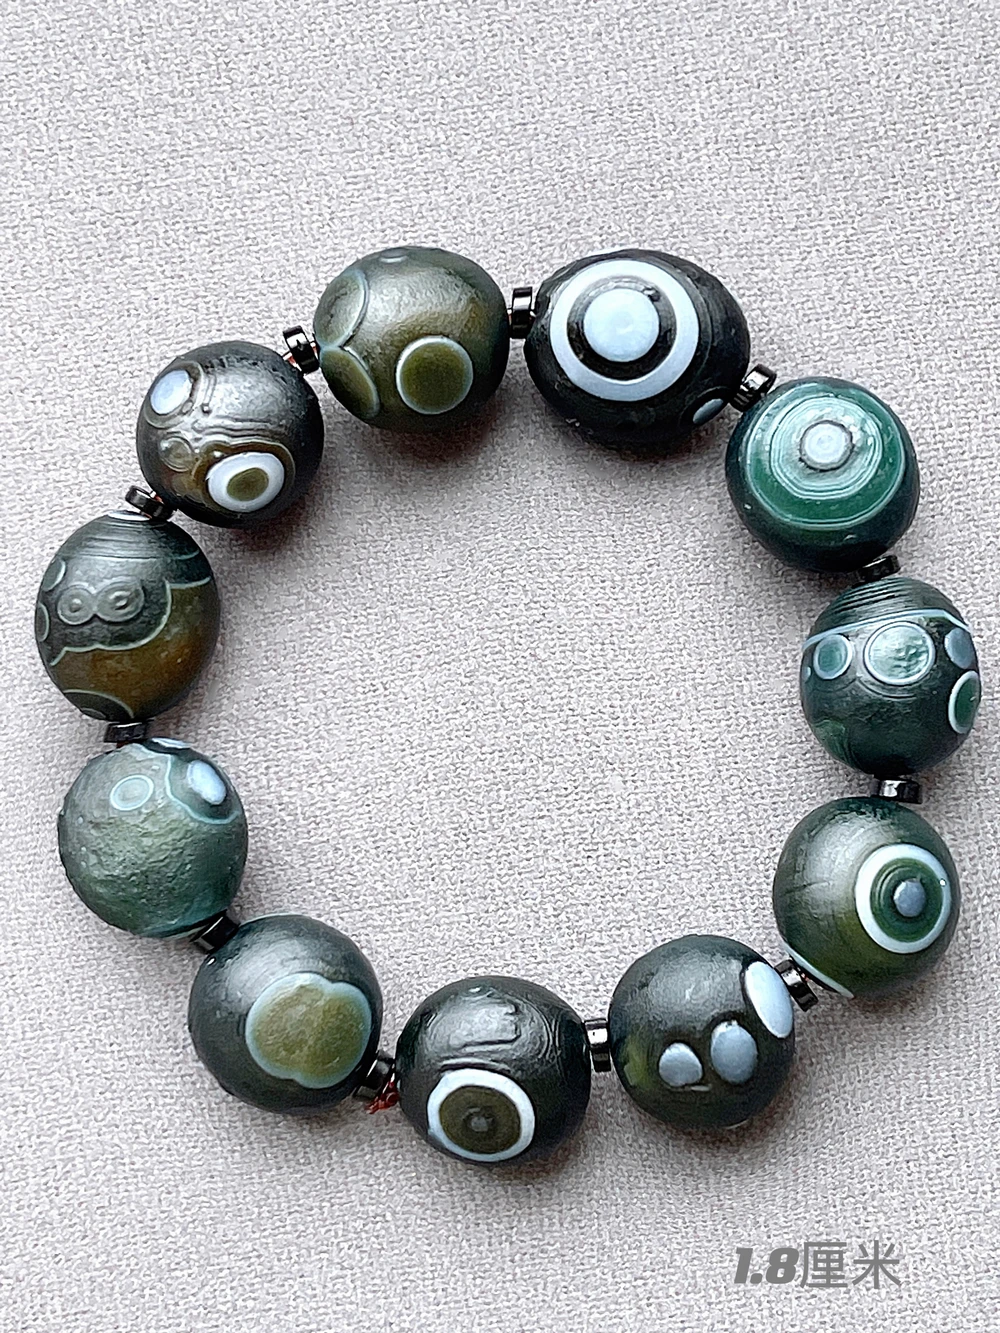 

Pure Natural Agate Stone Bracelet Natural Agate Jewelry Beads Chain Hand Strings Rare Charms Agate Evil Eye Bracelet SC-11